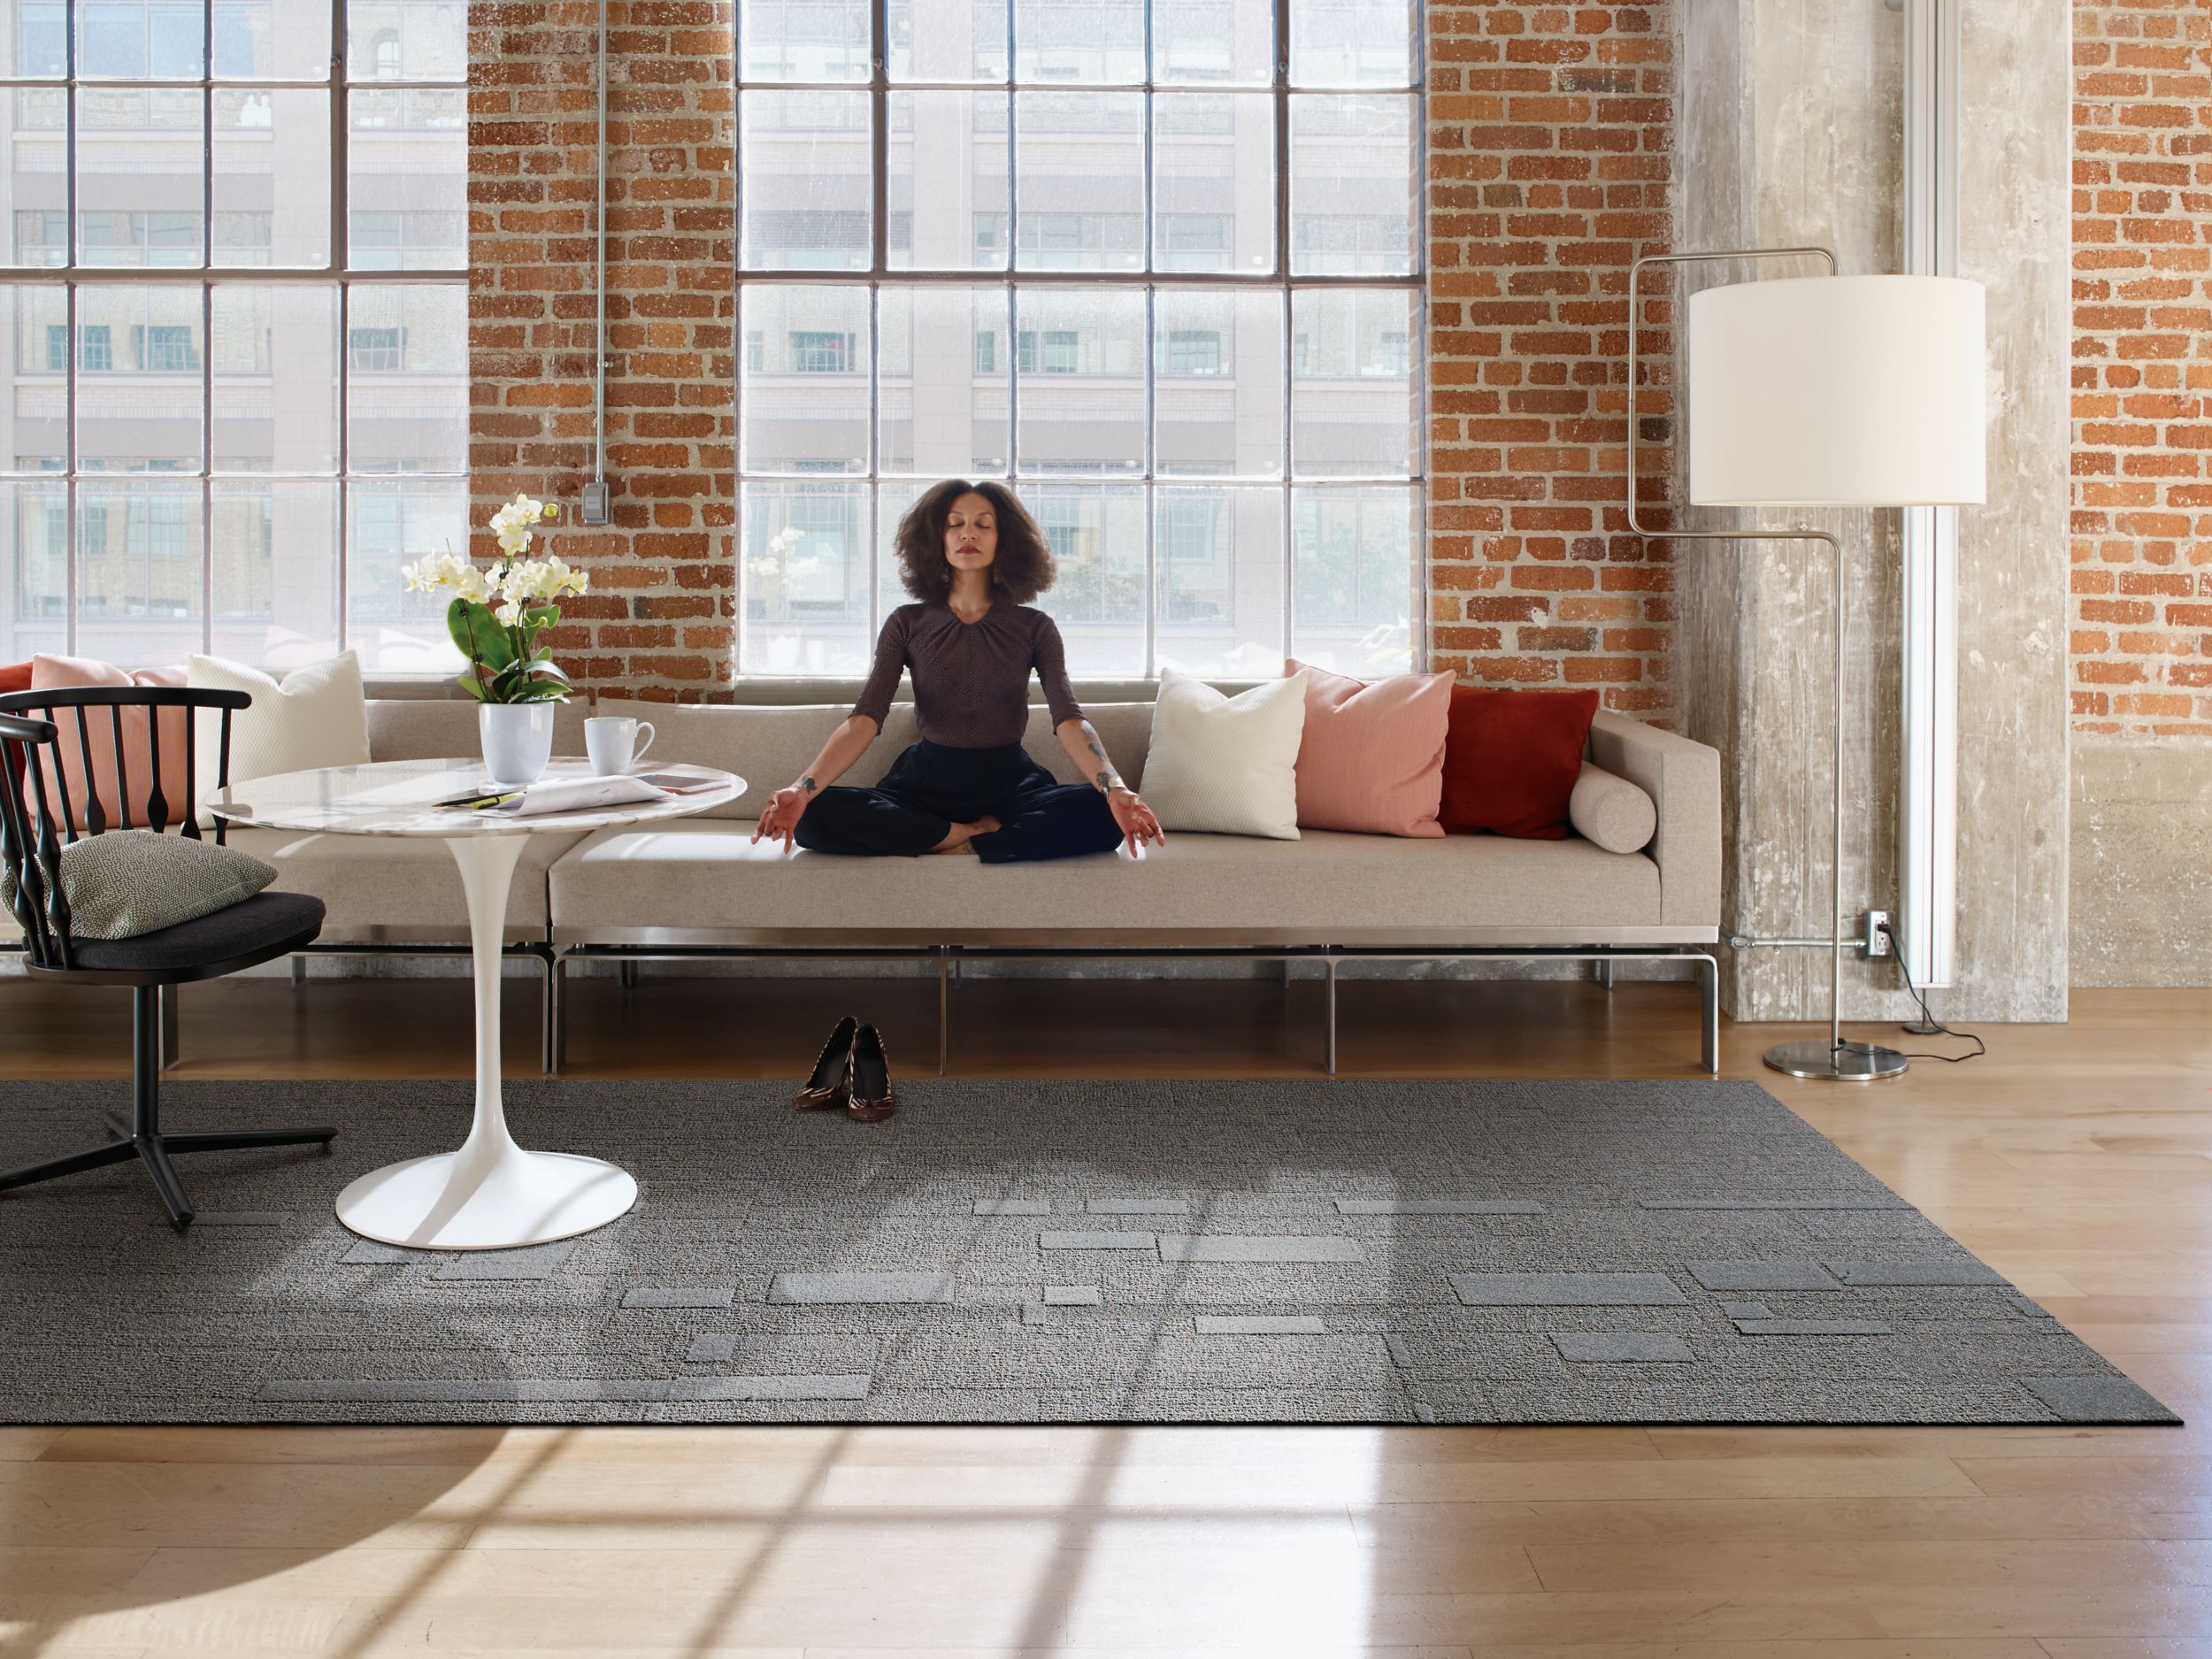 Interface EM551 plank carpet tile with woman meditating on couch imagen número 11